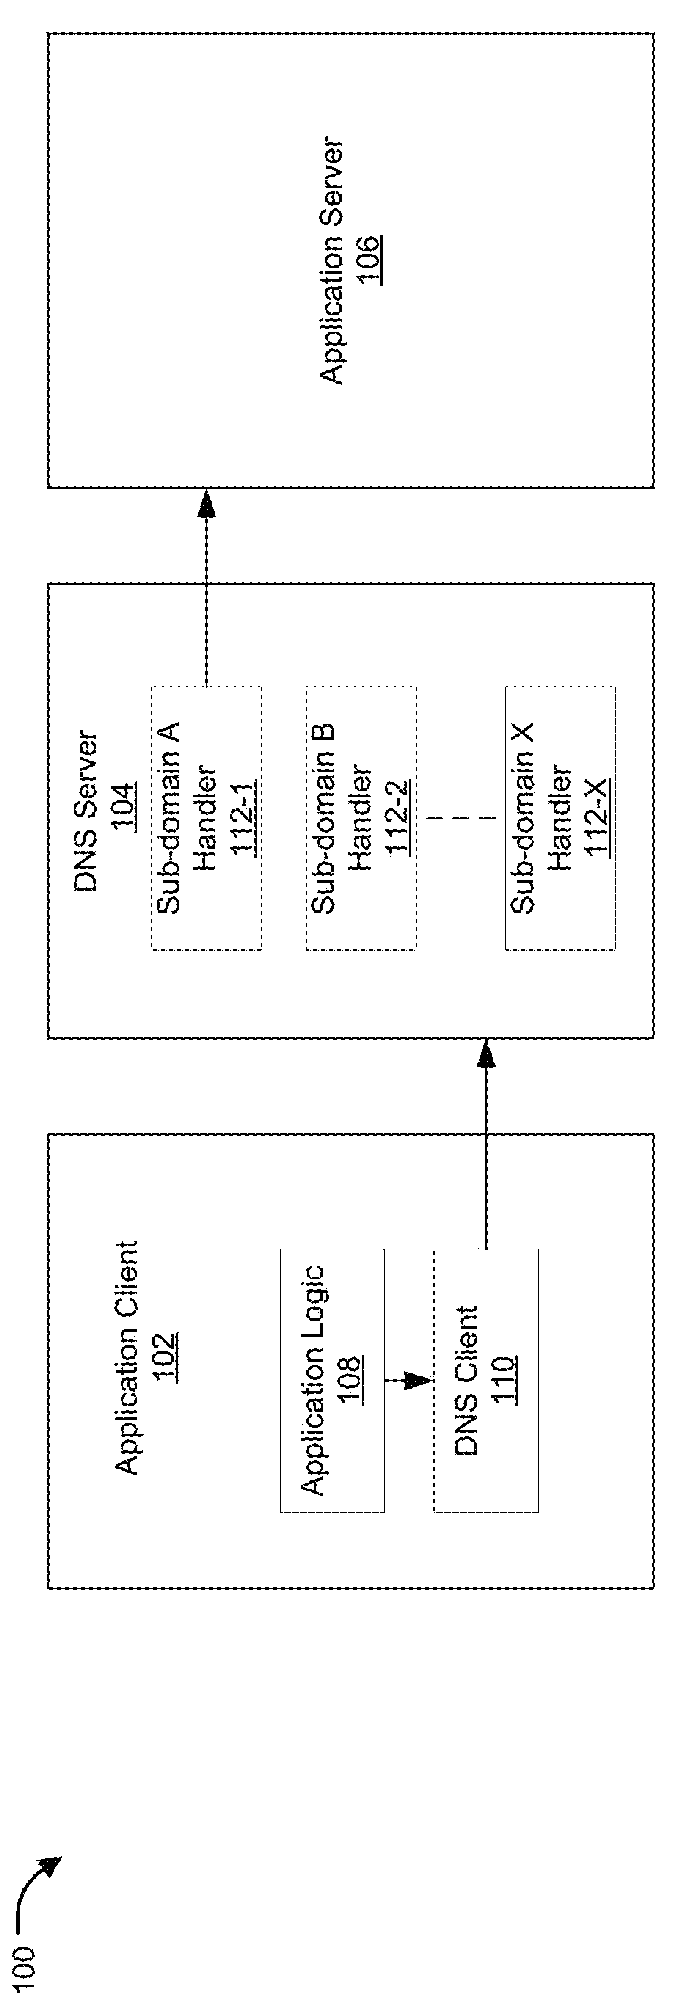 Dns-enabled communication between heterogeneous devices